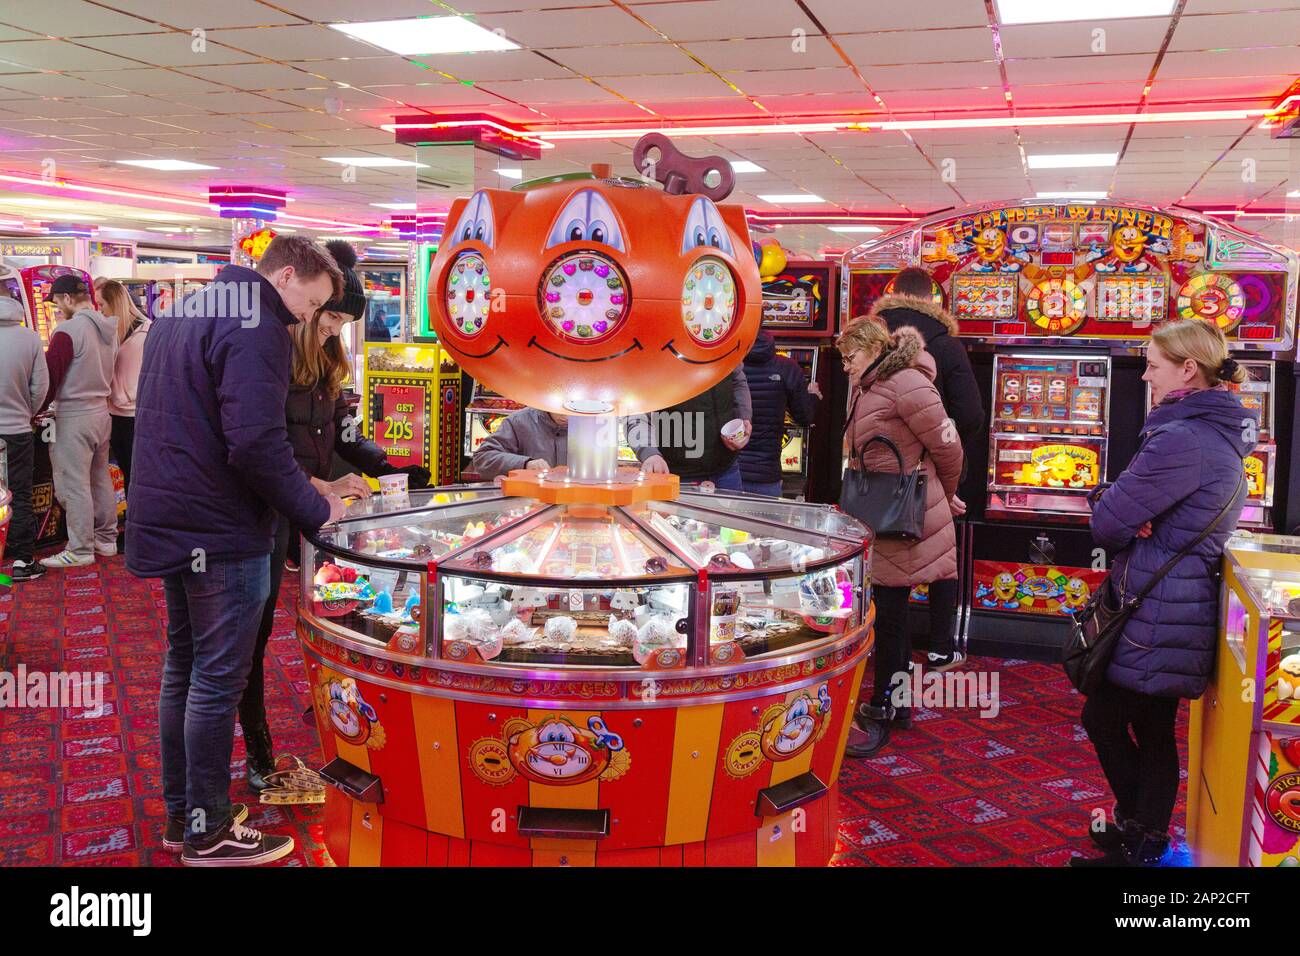 Amusement arcade UK - people playing on the coin or slot machines in the amusements arcade, Skegness Lincolnshire UK Stock Photo